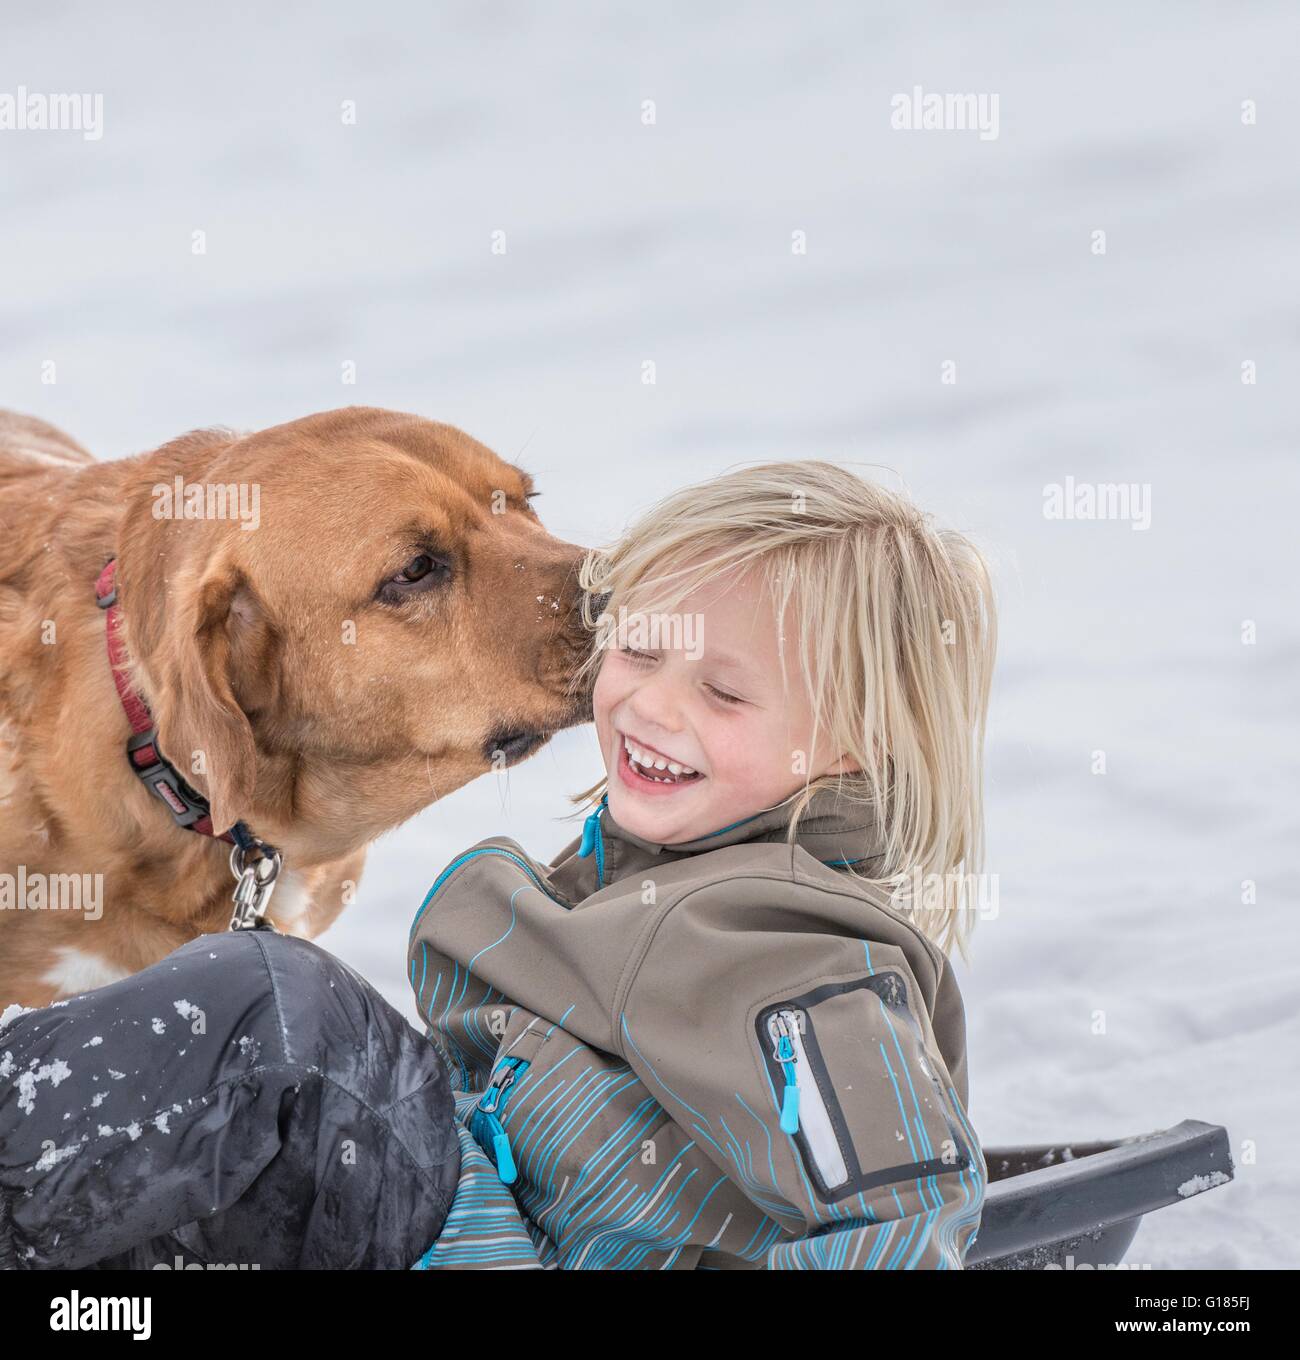 Pet dog licking boy's ear in snow Stock Photo